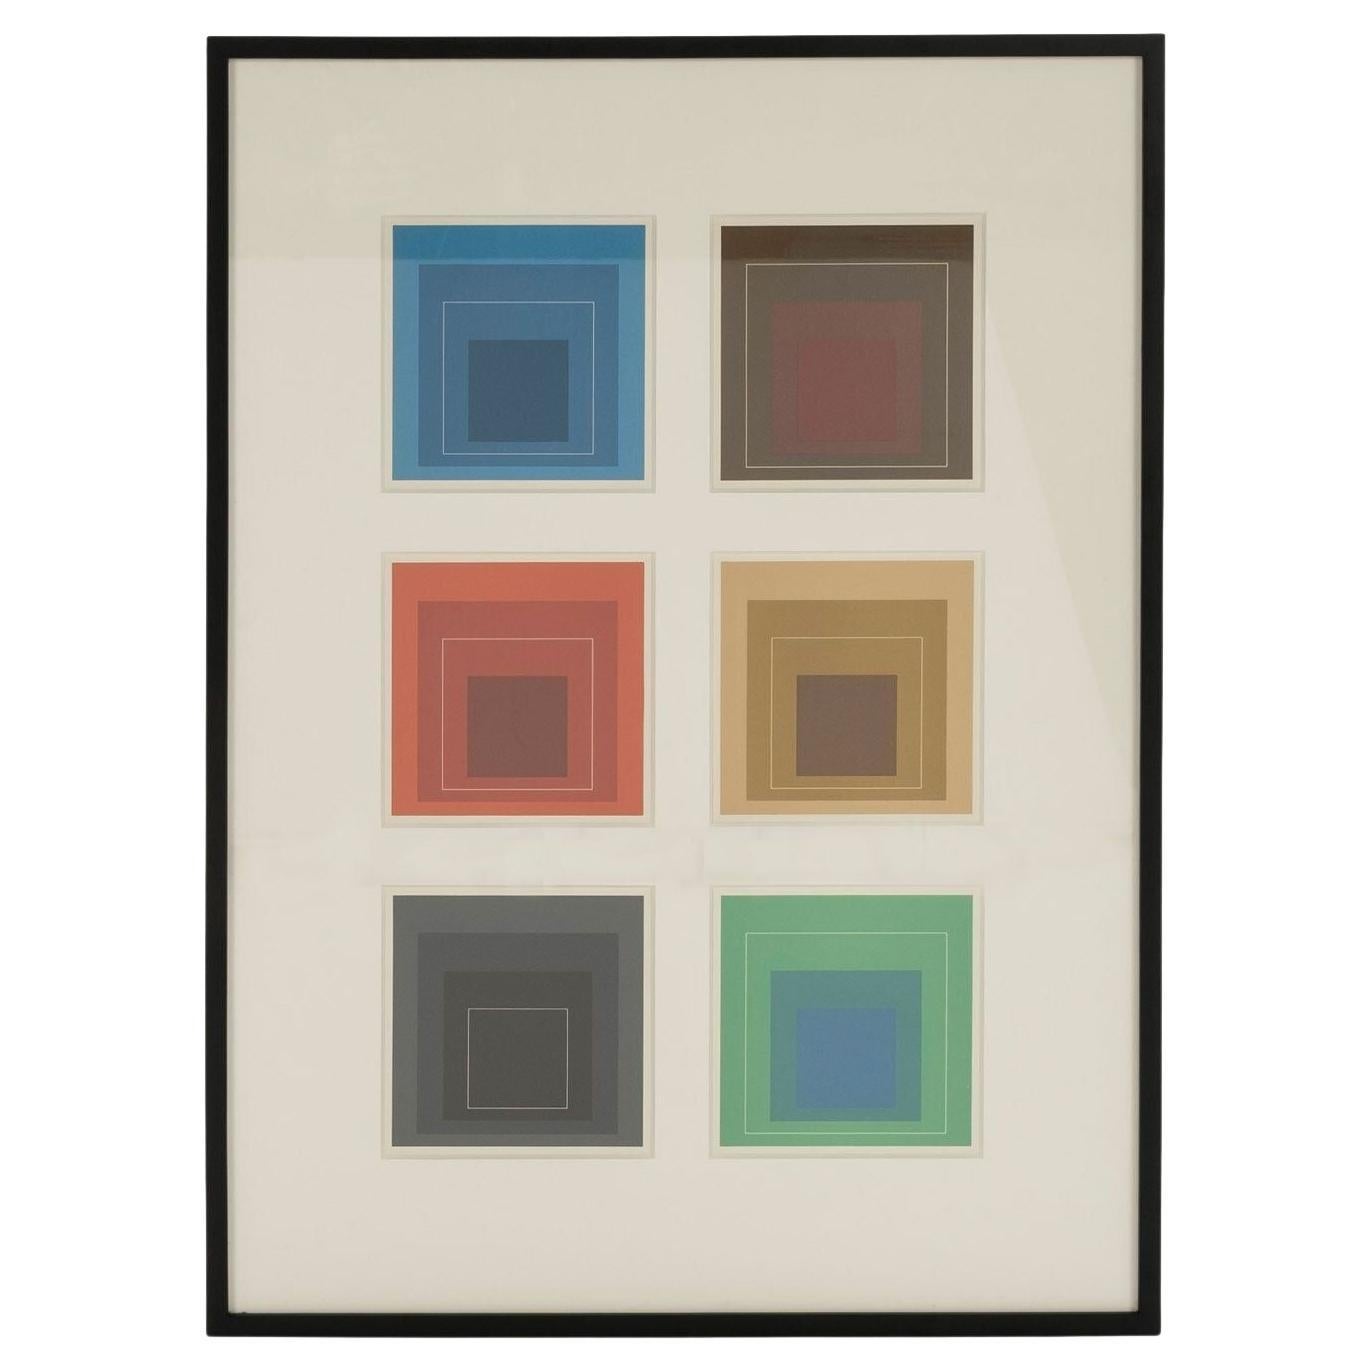 Framed: Six Lithographs "White Lines Squares" After Josef Albers